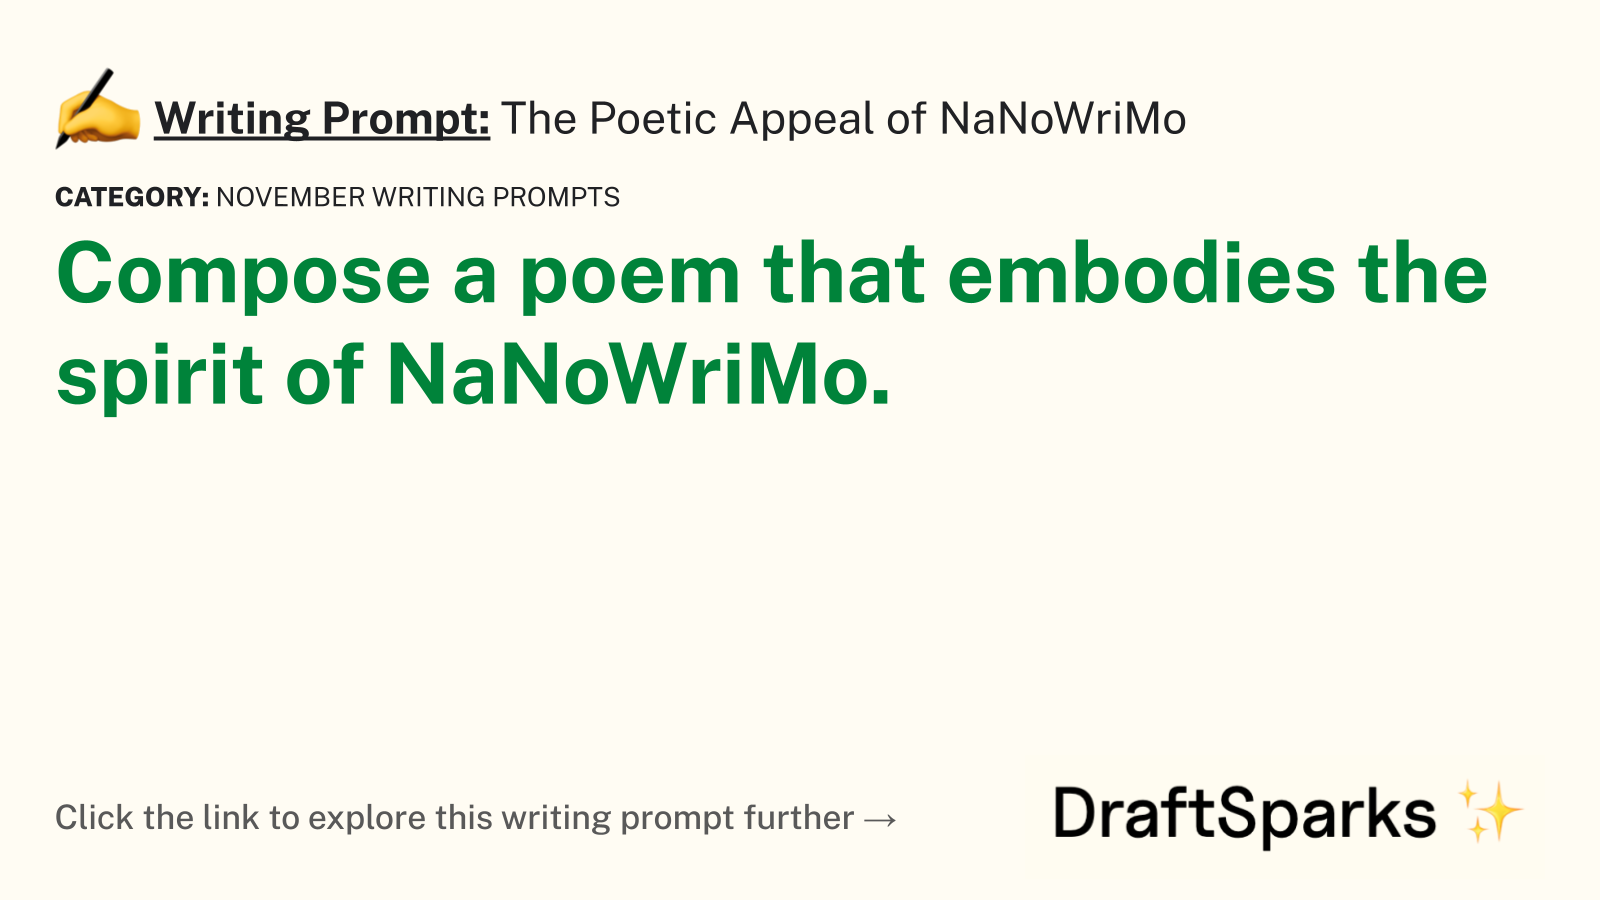 The Poetic Appeal of NaNoWriMo